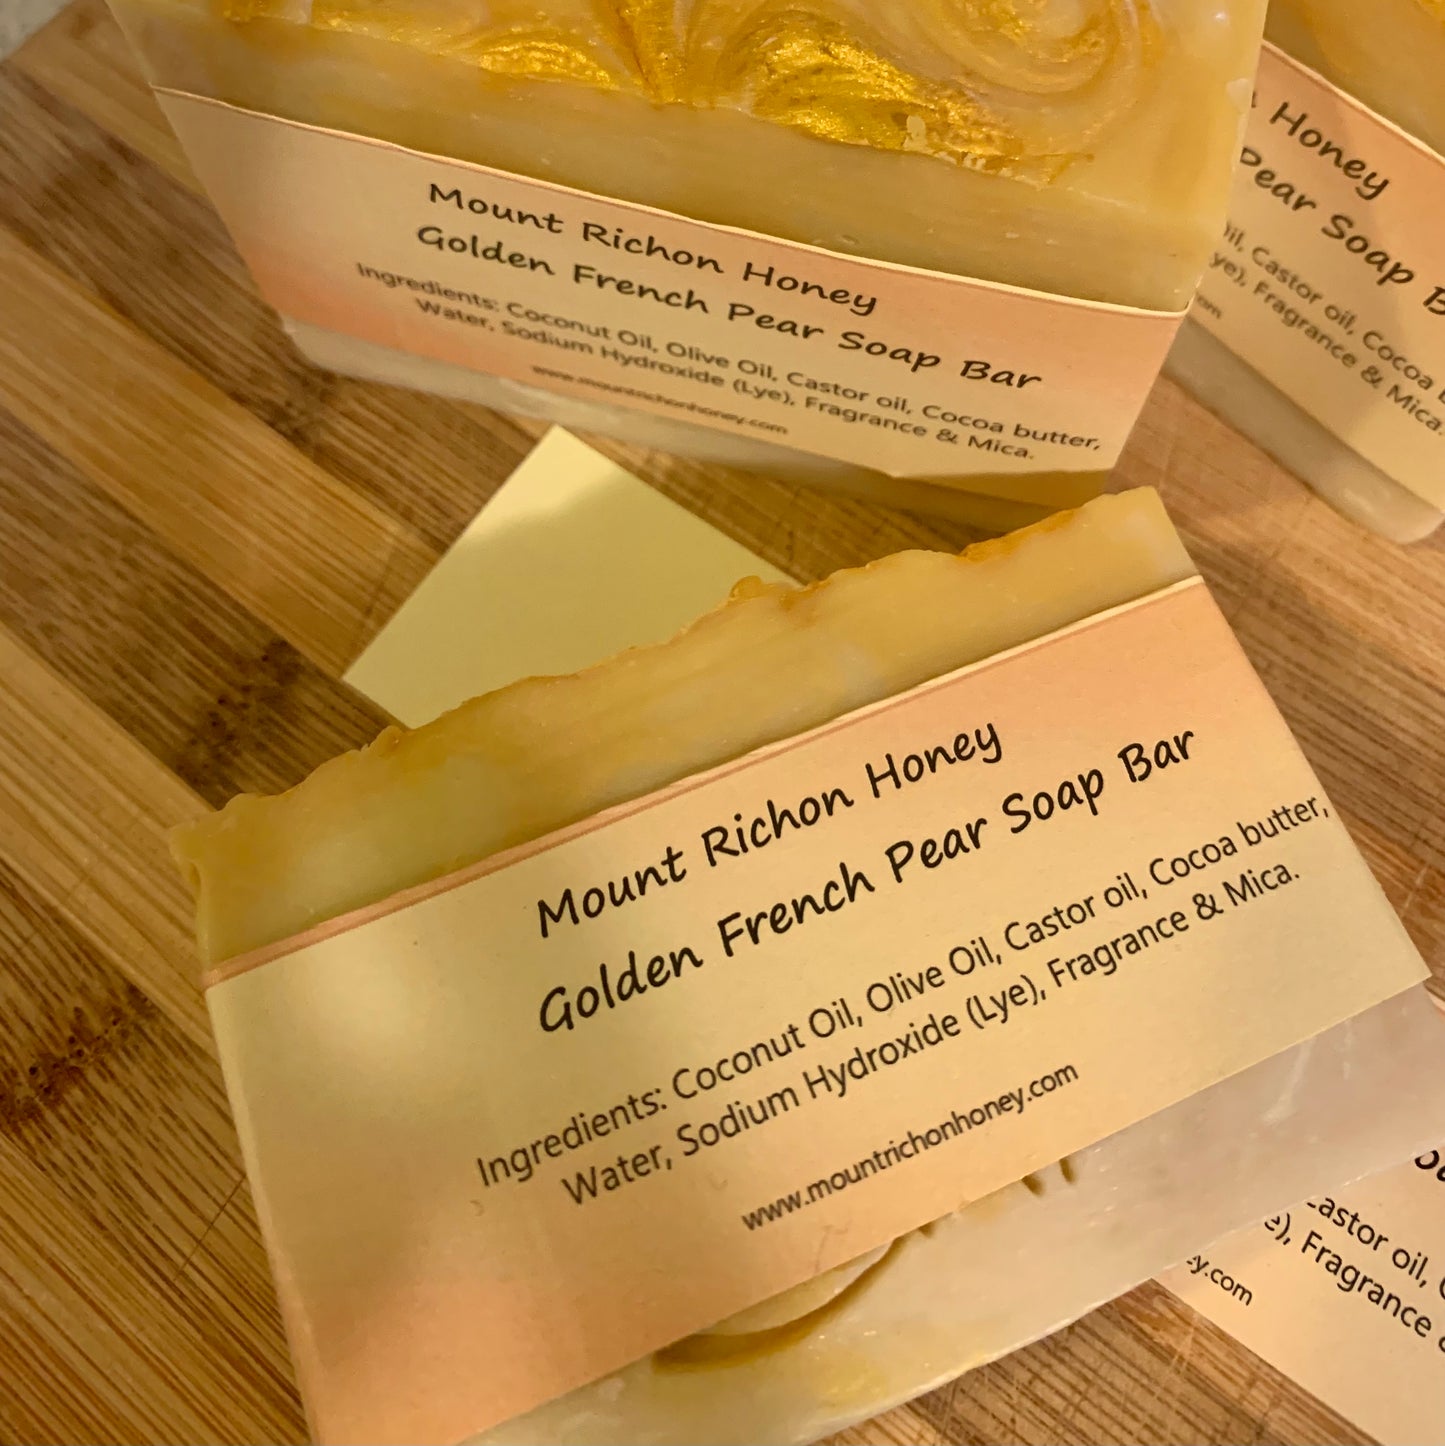 Golden French Pear Soap